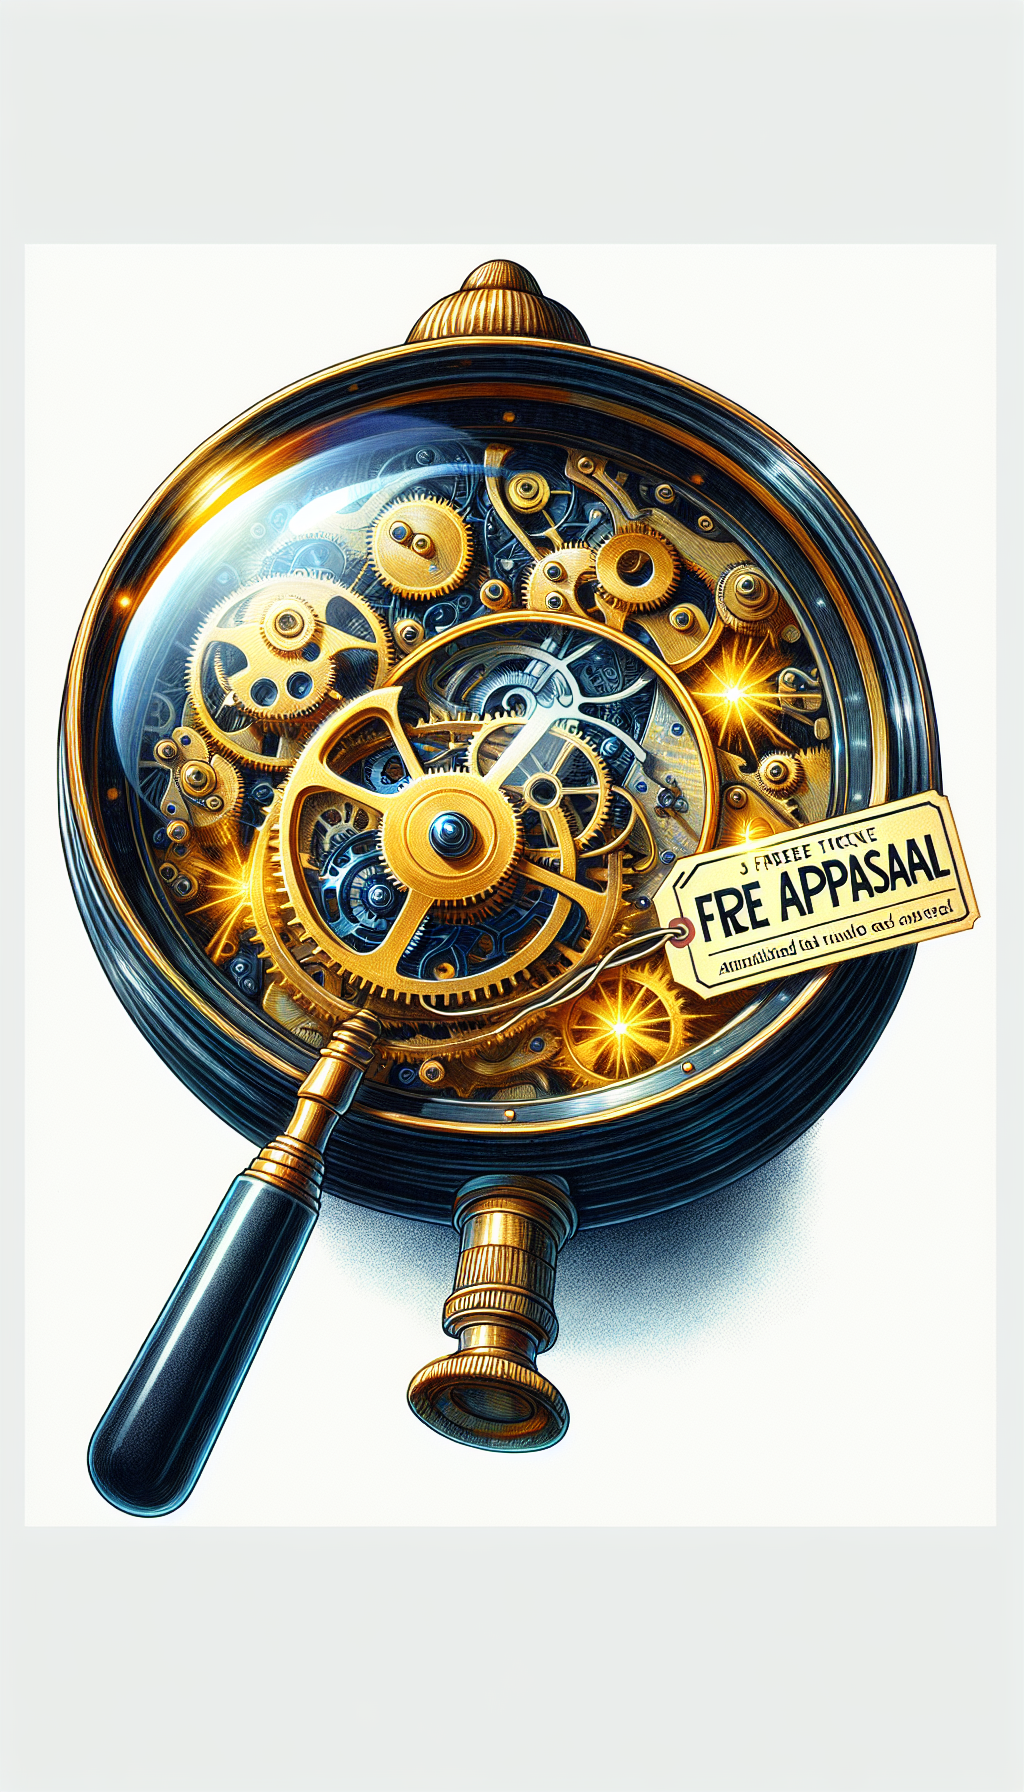 An illustration depicts a magnifying glass hovering over a gleaming, well-oiled antique clock, revealing its intricate gears in pristine condition, with a "Free Appraisal" golden ticket nestled within its workings, symbolizing the enhancement of value through meticulous care. The image blends a fine line style for the clock's mechanics with a radiant watercolor glow for the maintenance effect.